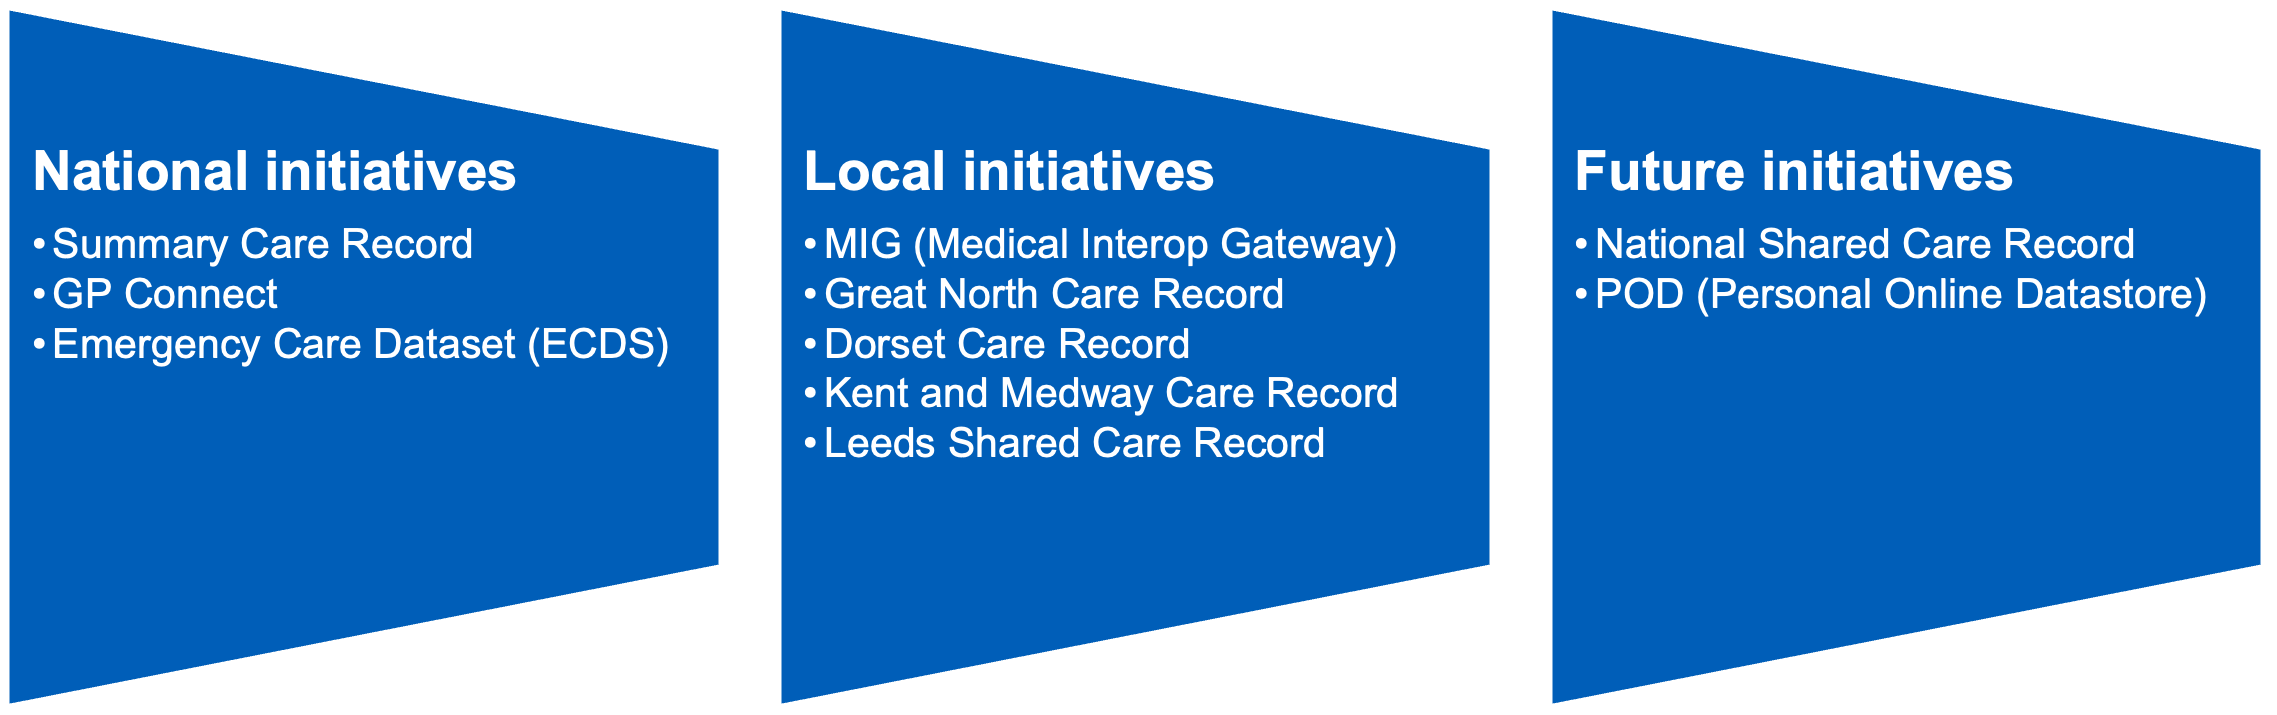 The shared care record data landscape as understood by the team